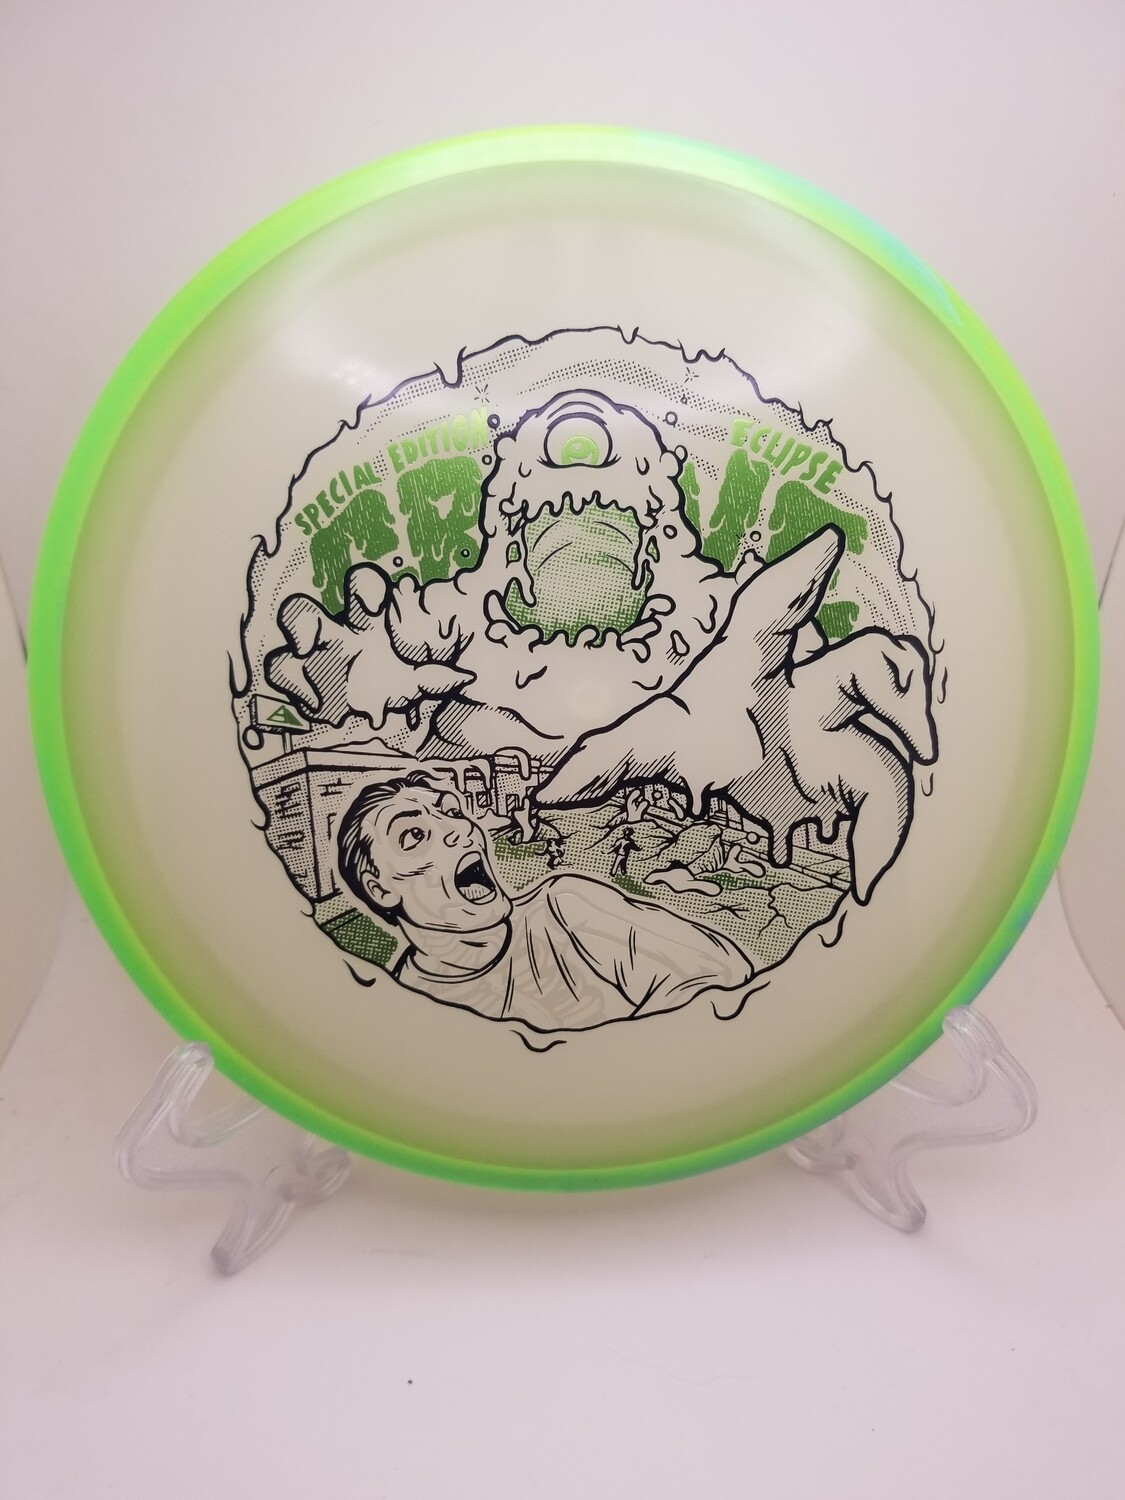 Axiom Discs Special Edition Eclipse Crave Dayglow Green Swirly Rim 169g